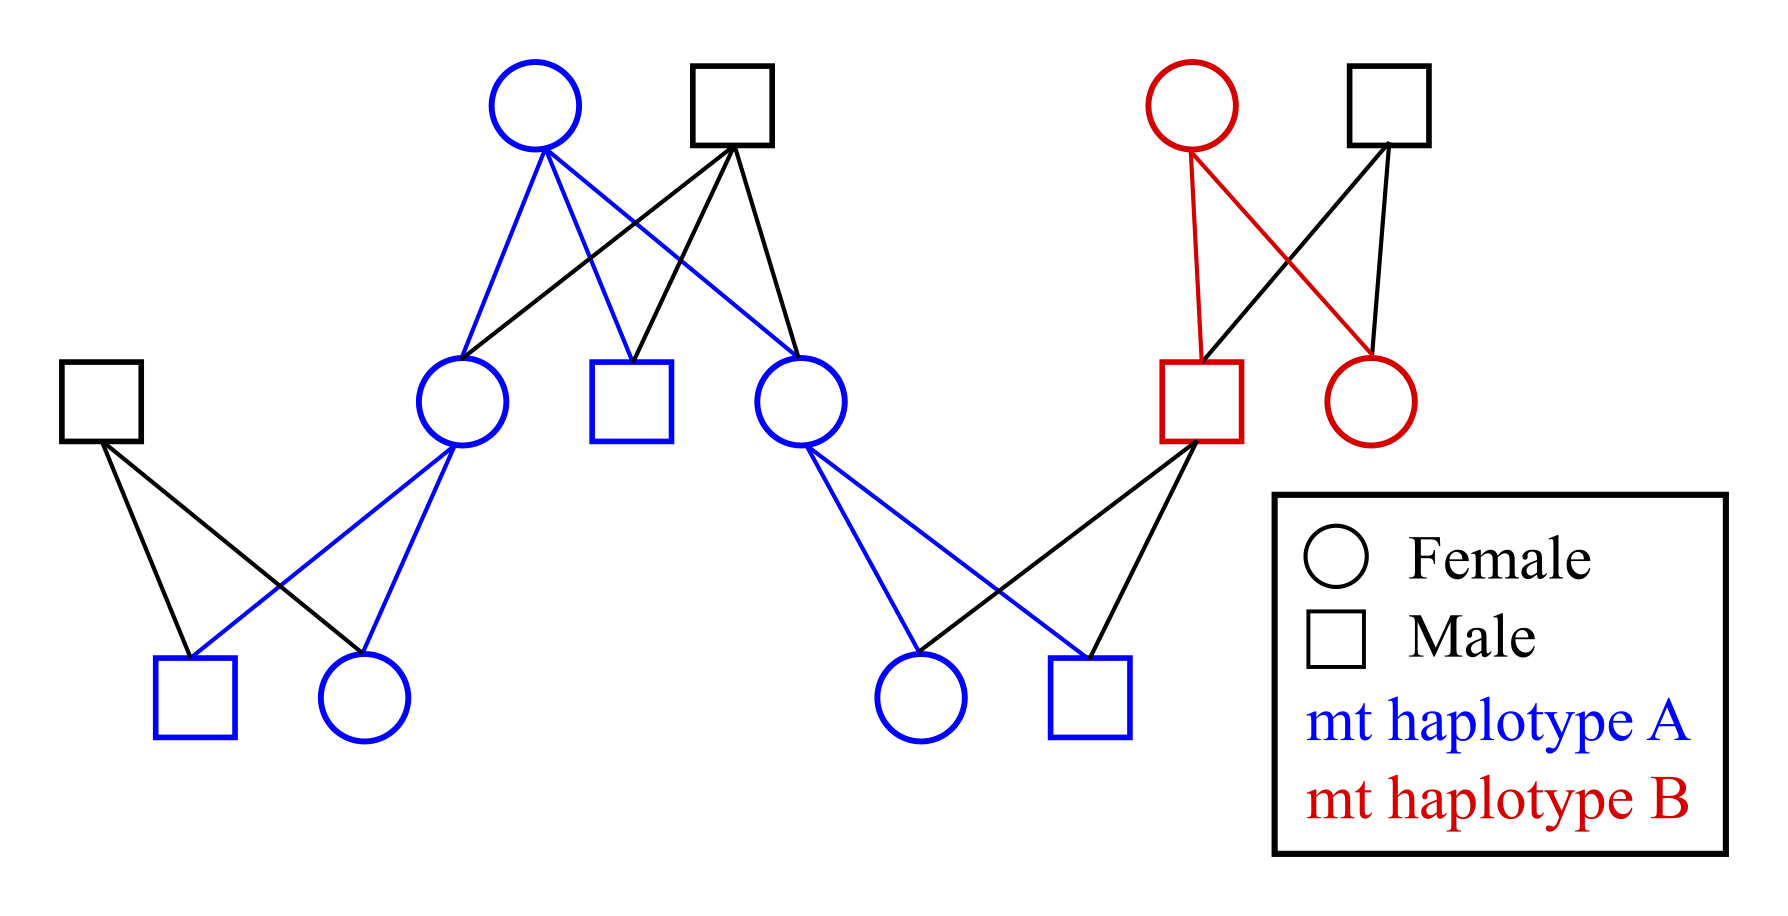 Example pedigree with colour coded mitochondrial haplotype inheritance